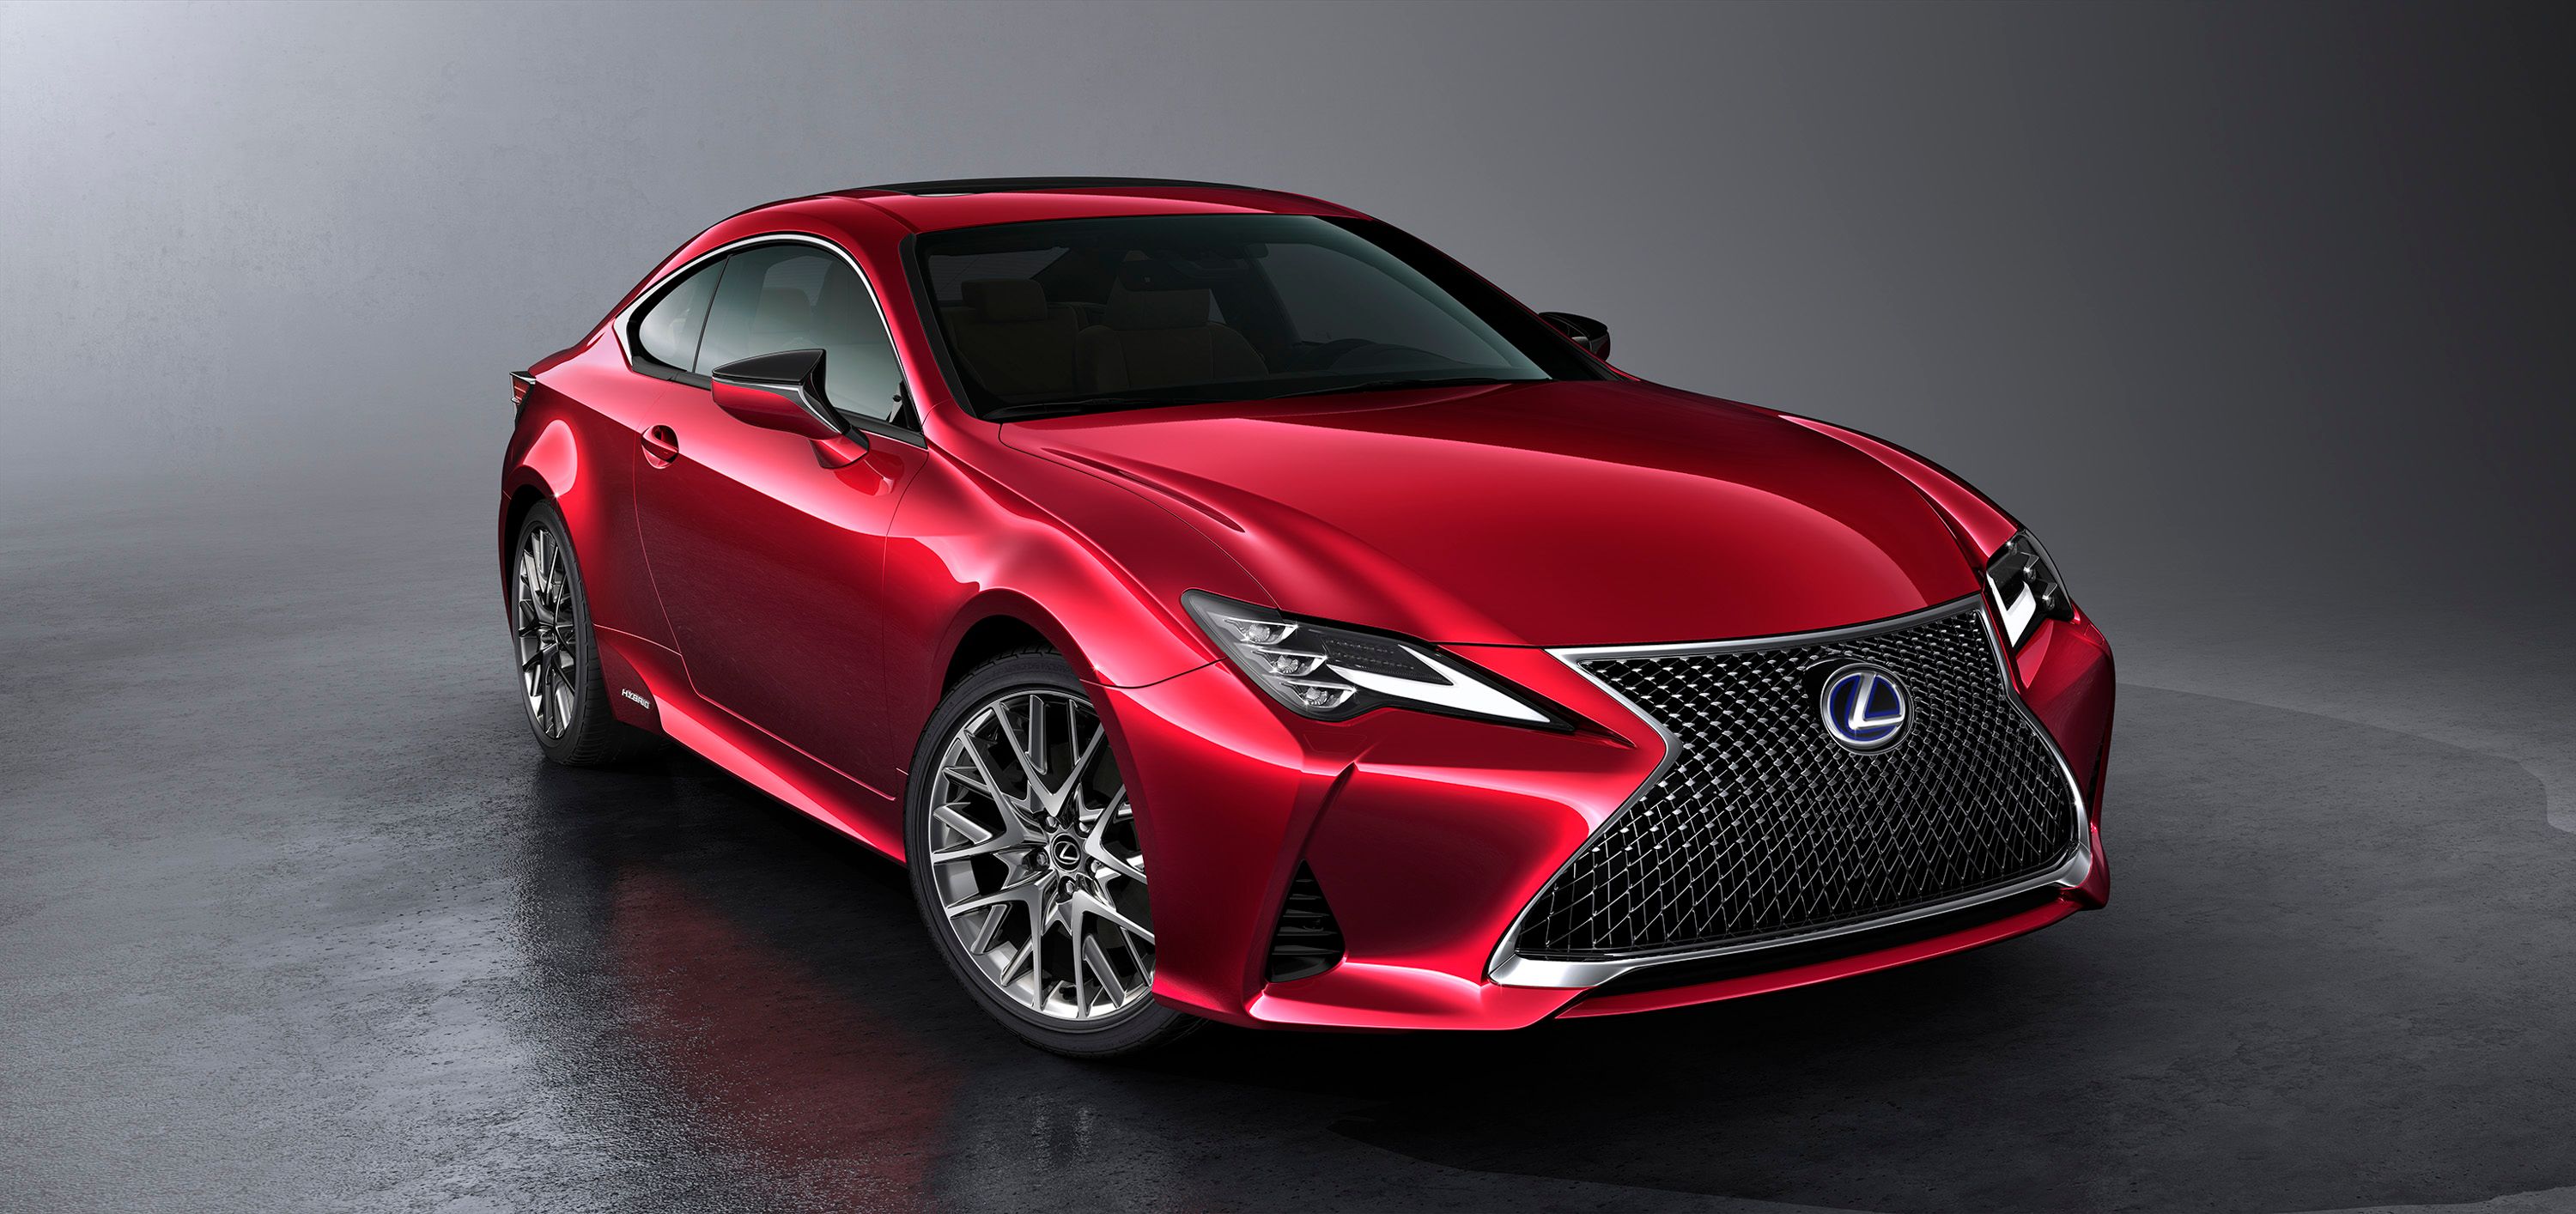 2019 2019 Lexus RC Debuts in Paris with Hot, LC-inspired Looks